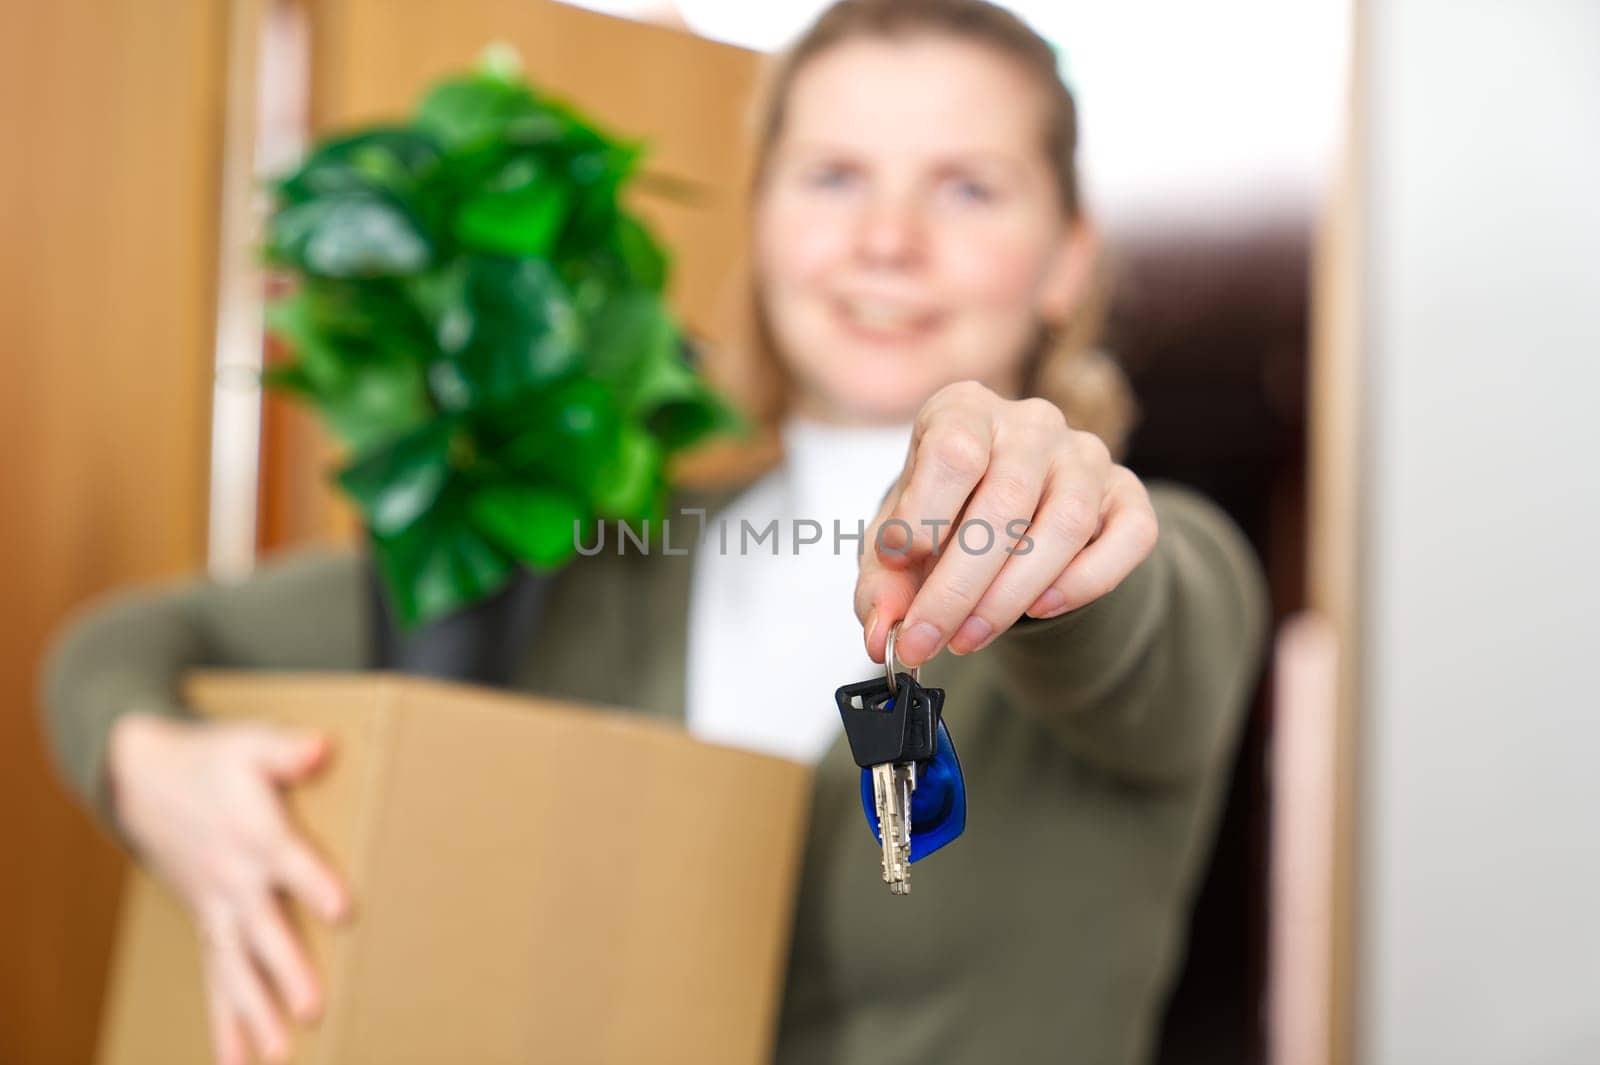 Starting new life. Overjoyed woman hold keys from new apartment or home. new life starts now by PhotoTime